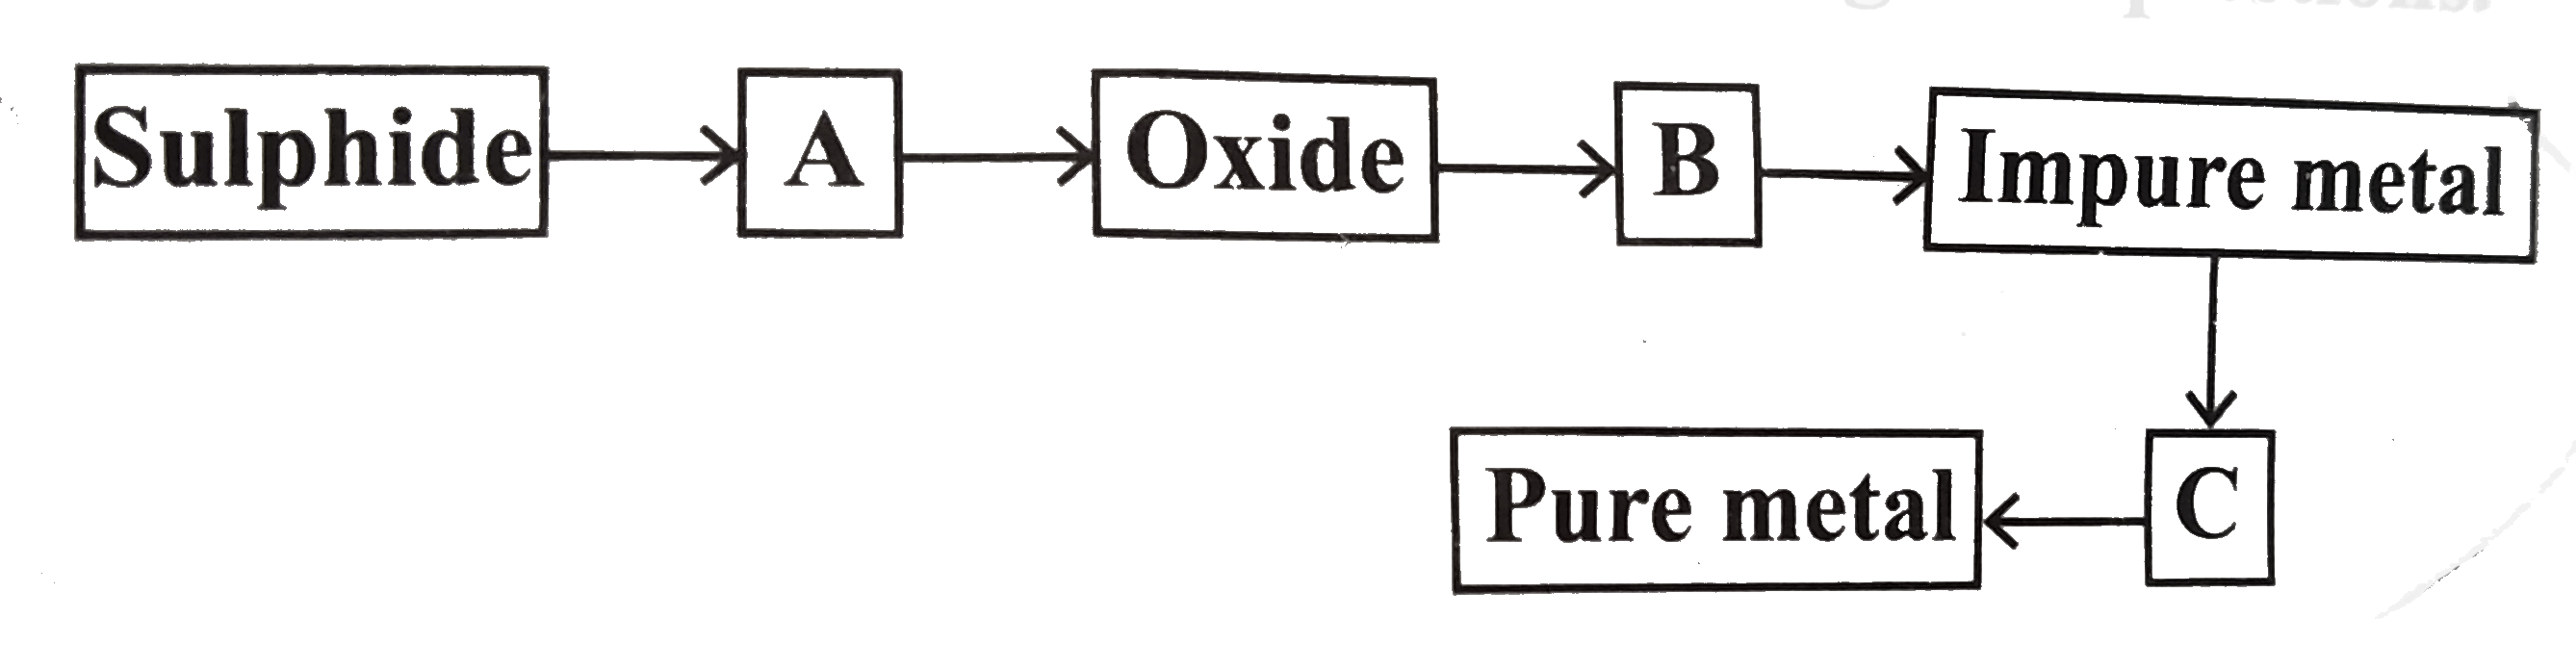 From the following flowsheet for the extraction of pure metal, answer the given questions.      (v) Reduction  of oxides to elements with carbon generally takes place at high temperature, hence Al is used in aluminothermite process. It is because :